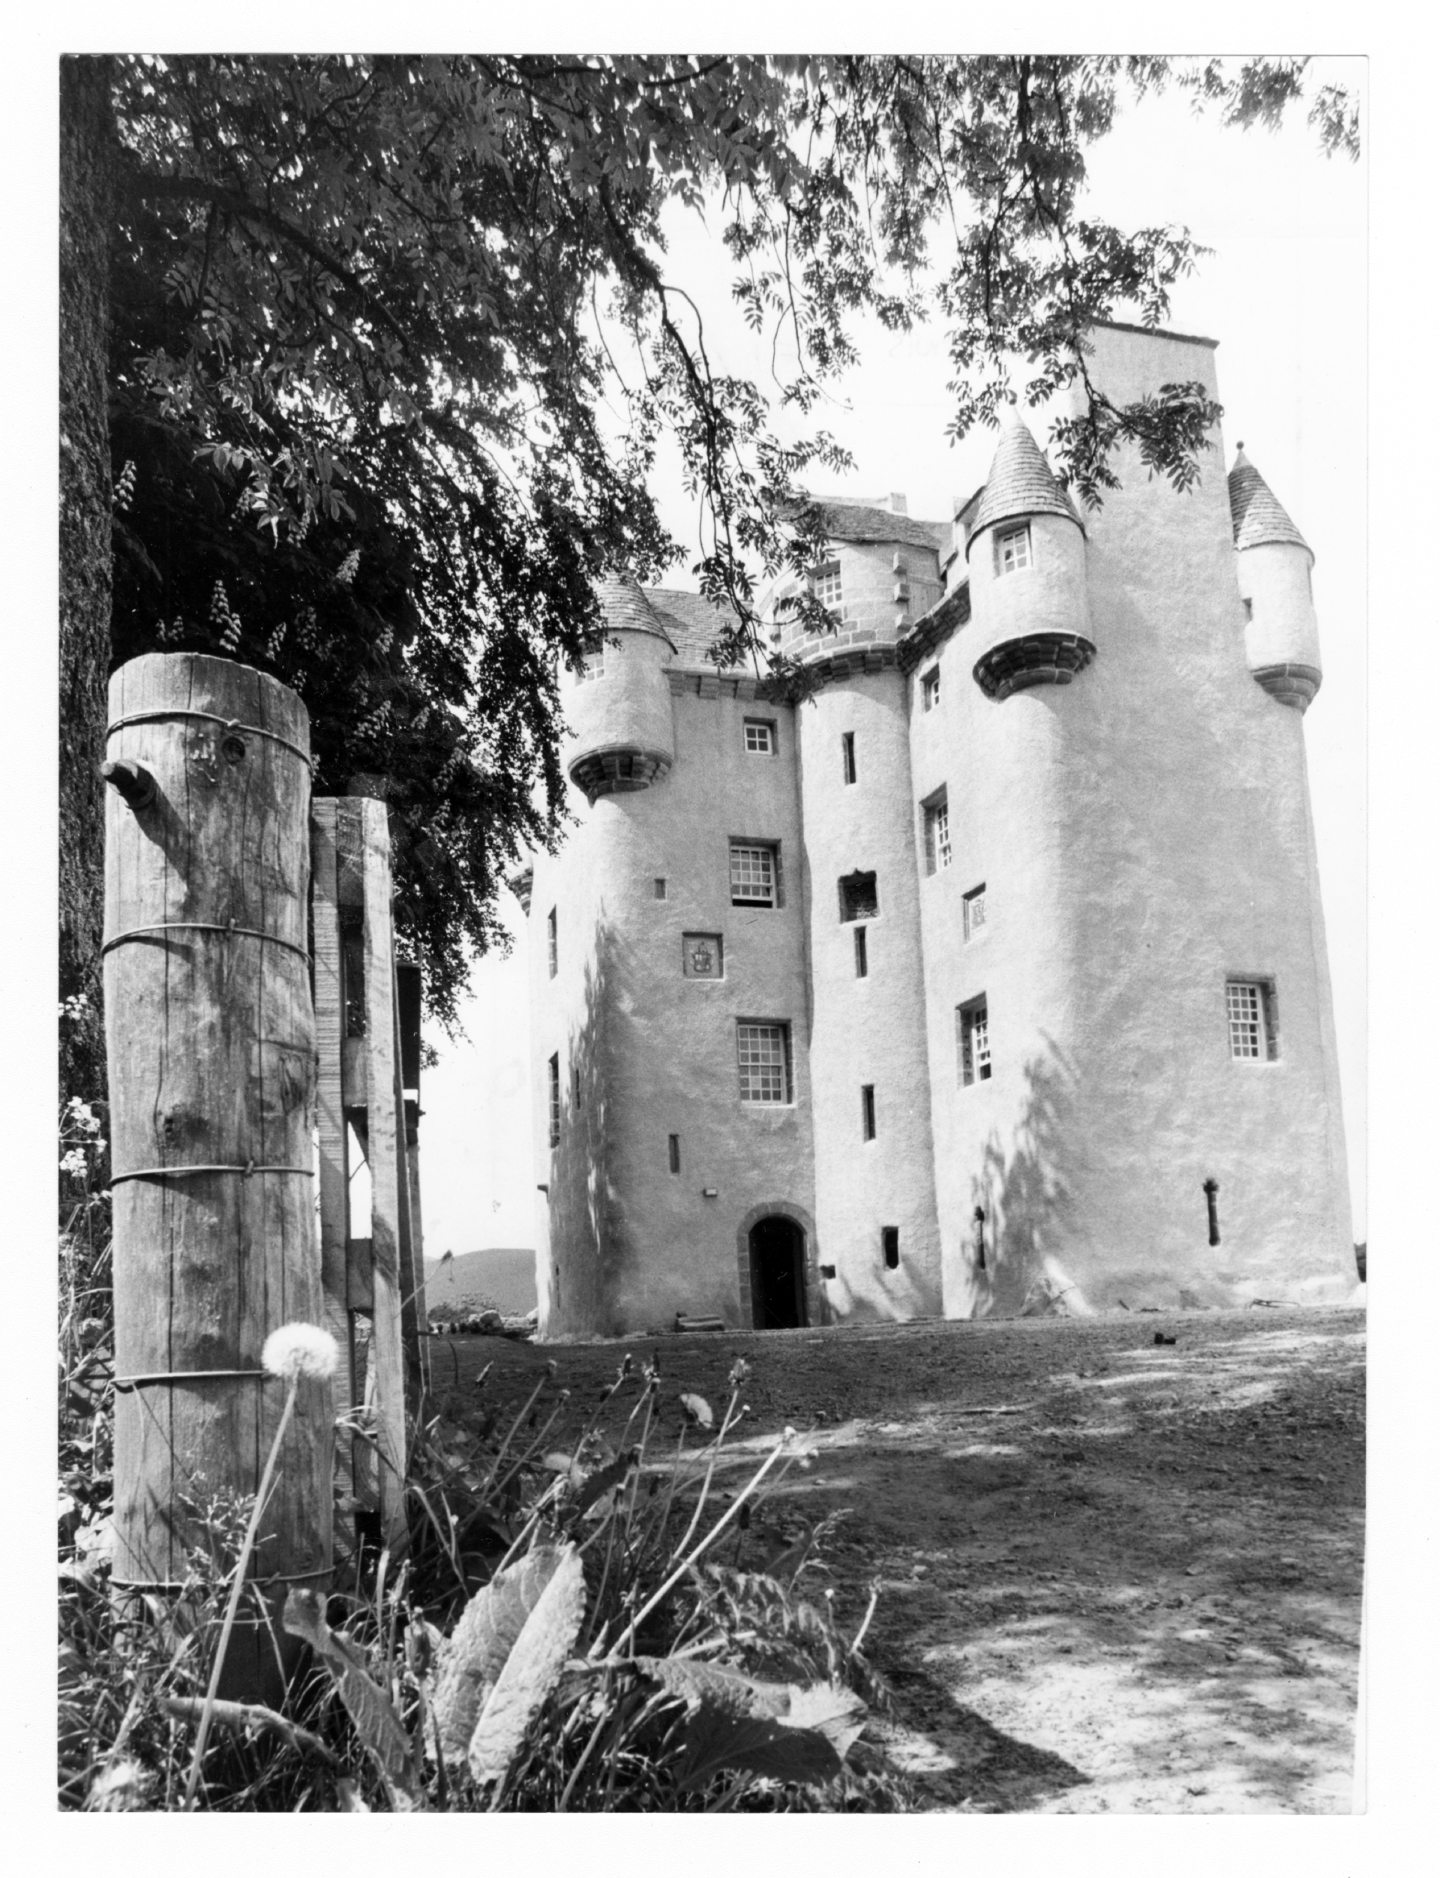 A black and white photo of Tillycairn Castle after the restoration